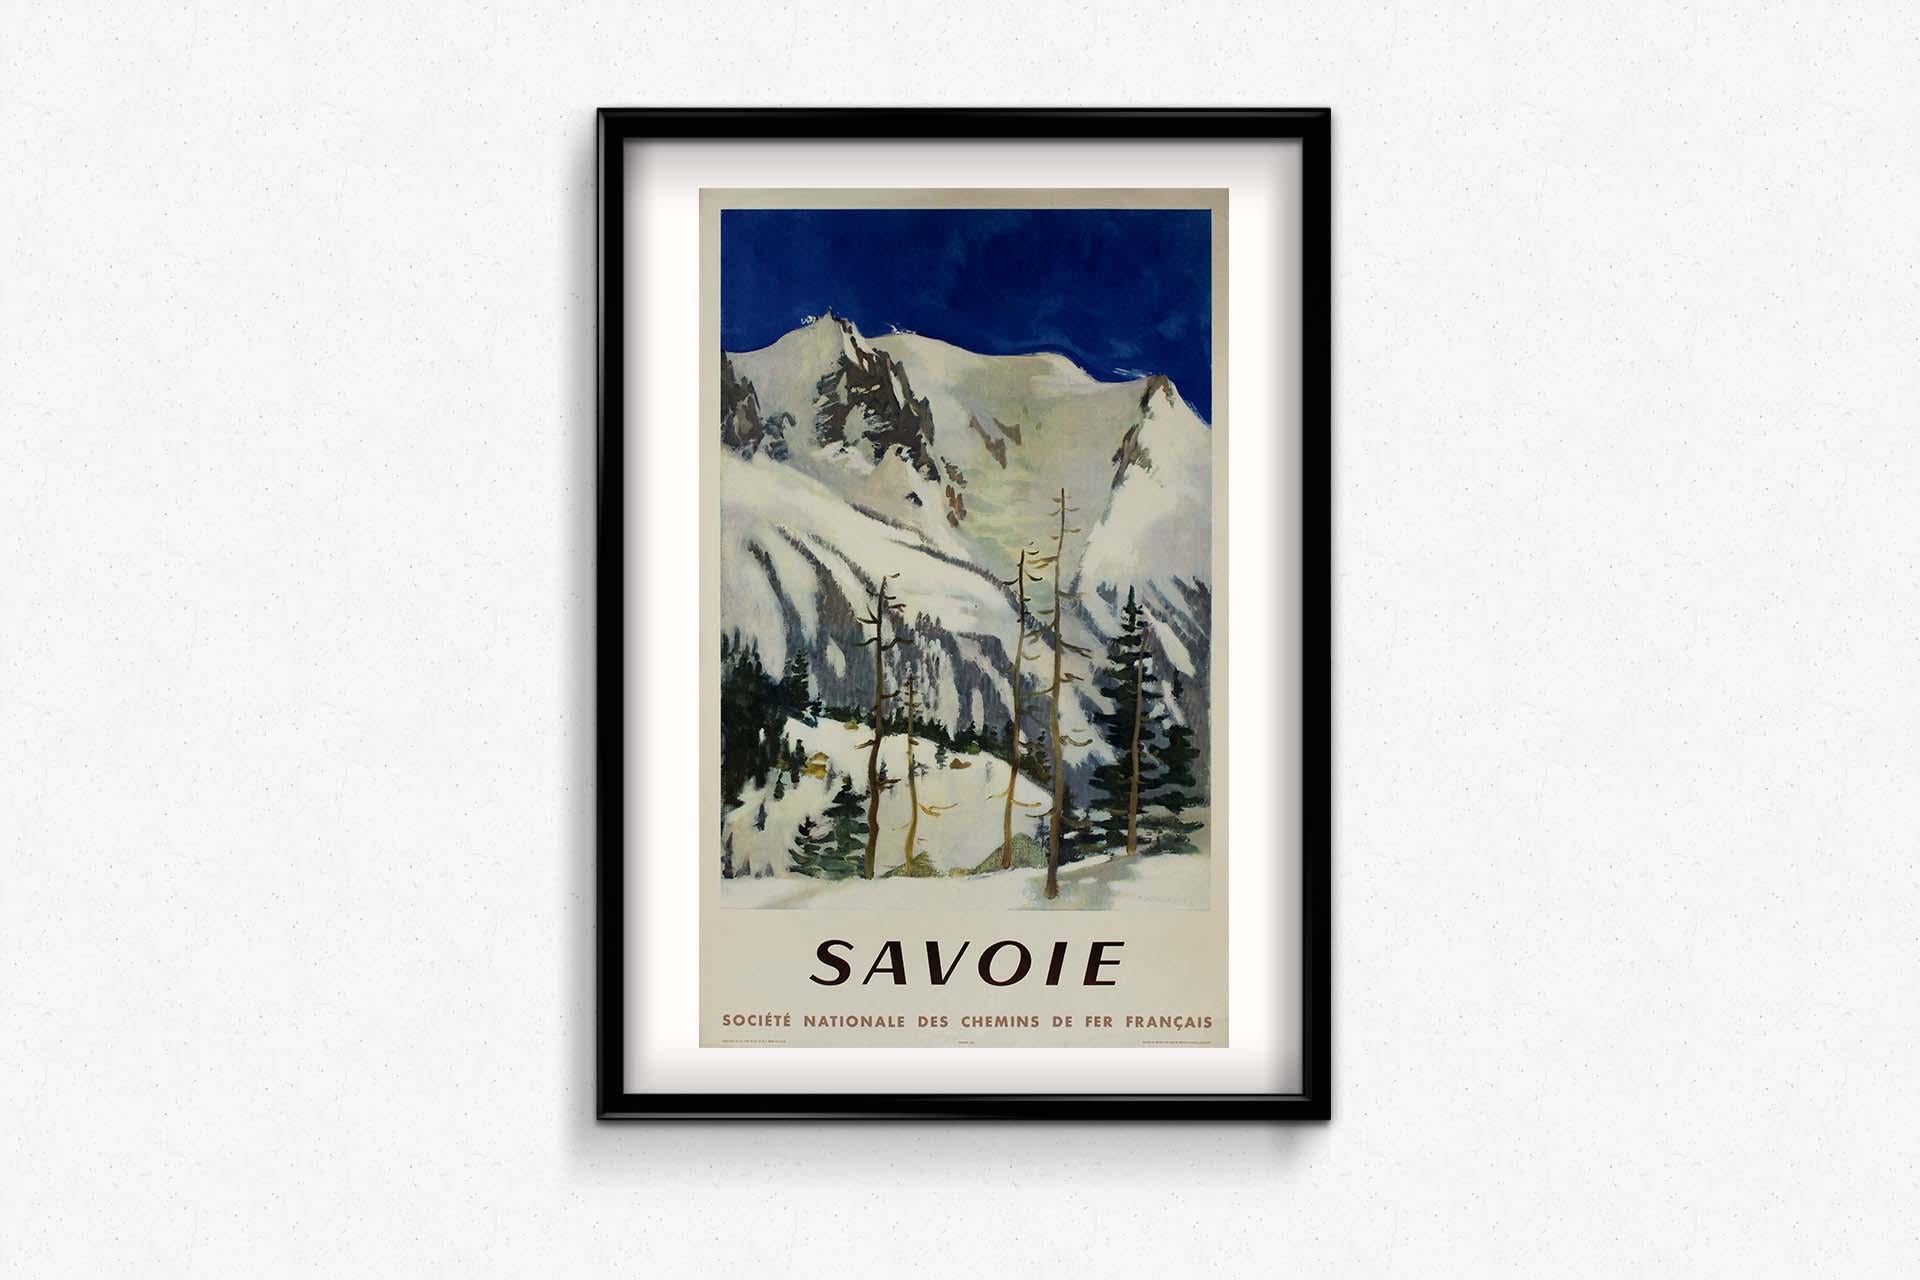 The original 1948 travel poster by Fontanarosa for Savoie, promoted by SNCF (French National Railway Company), offers a captivating glimpse into the allure of this picturesque region in France.
With a blend of vibrant colors and evocative imagery,